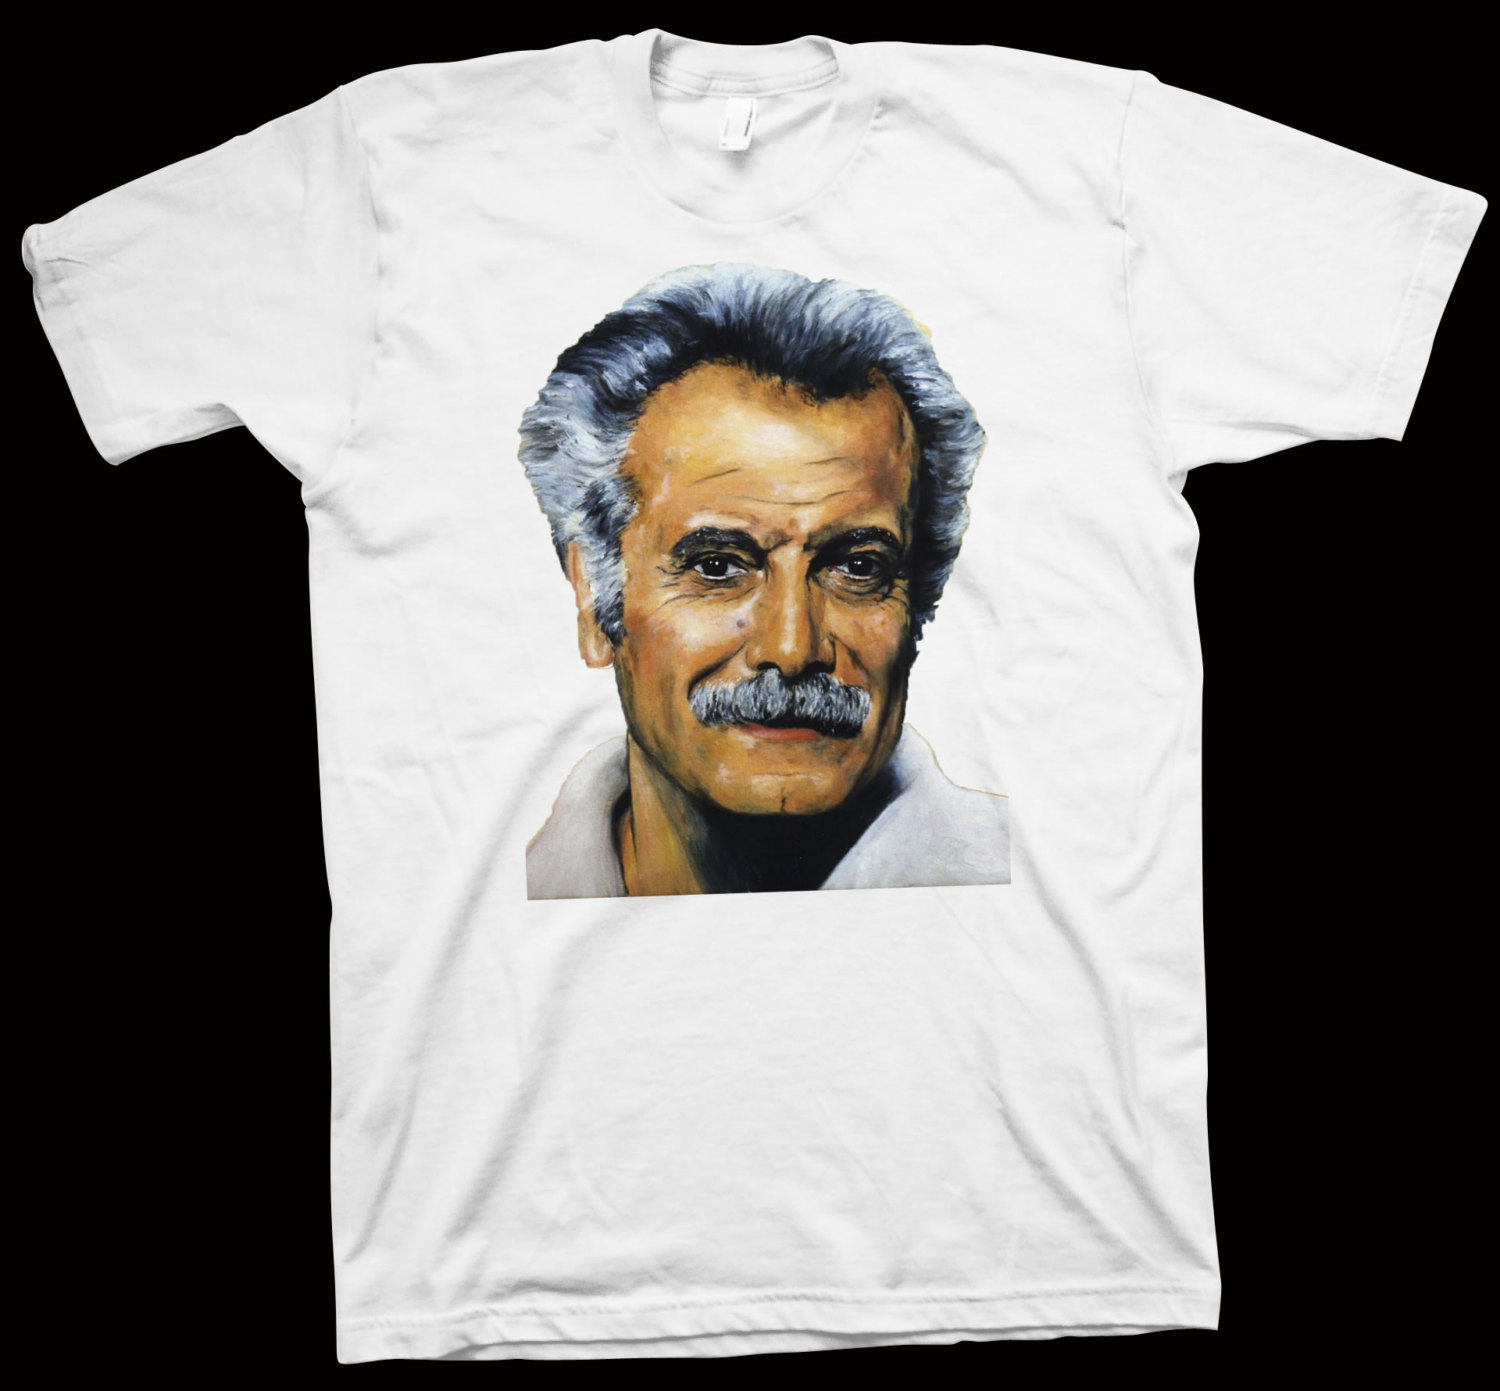 Primary image for Georges Brassens T-Shirt Serge Gainsbourg, Charles Aznavour, Jacques Brel